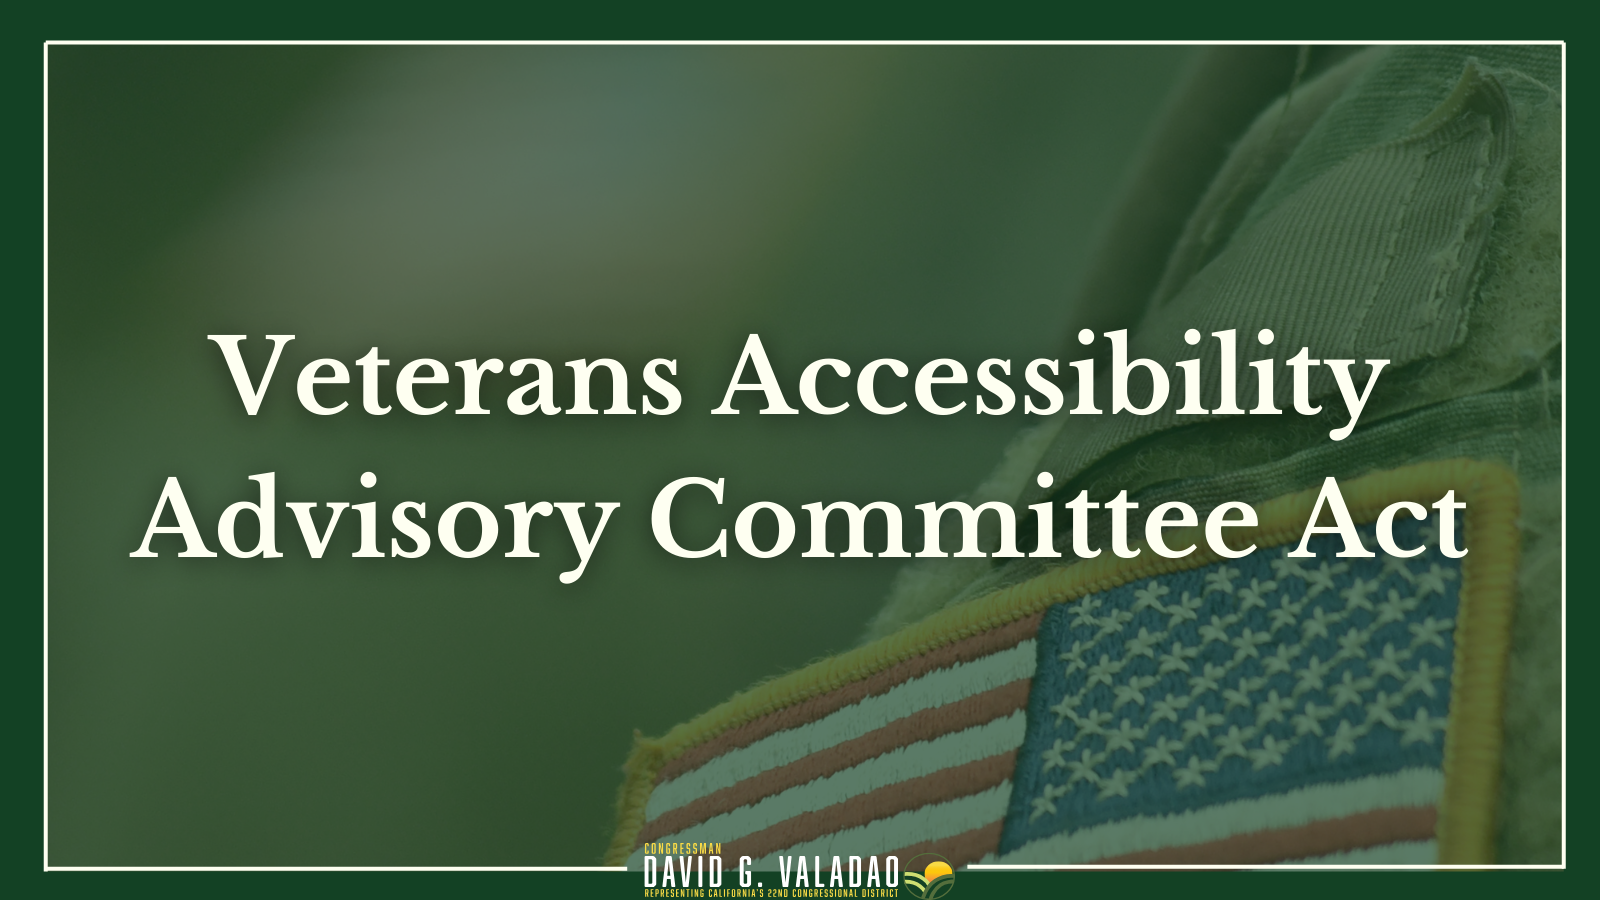 Rep. Valadao introduces Veterans Accessibility Advisory Committee Act